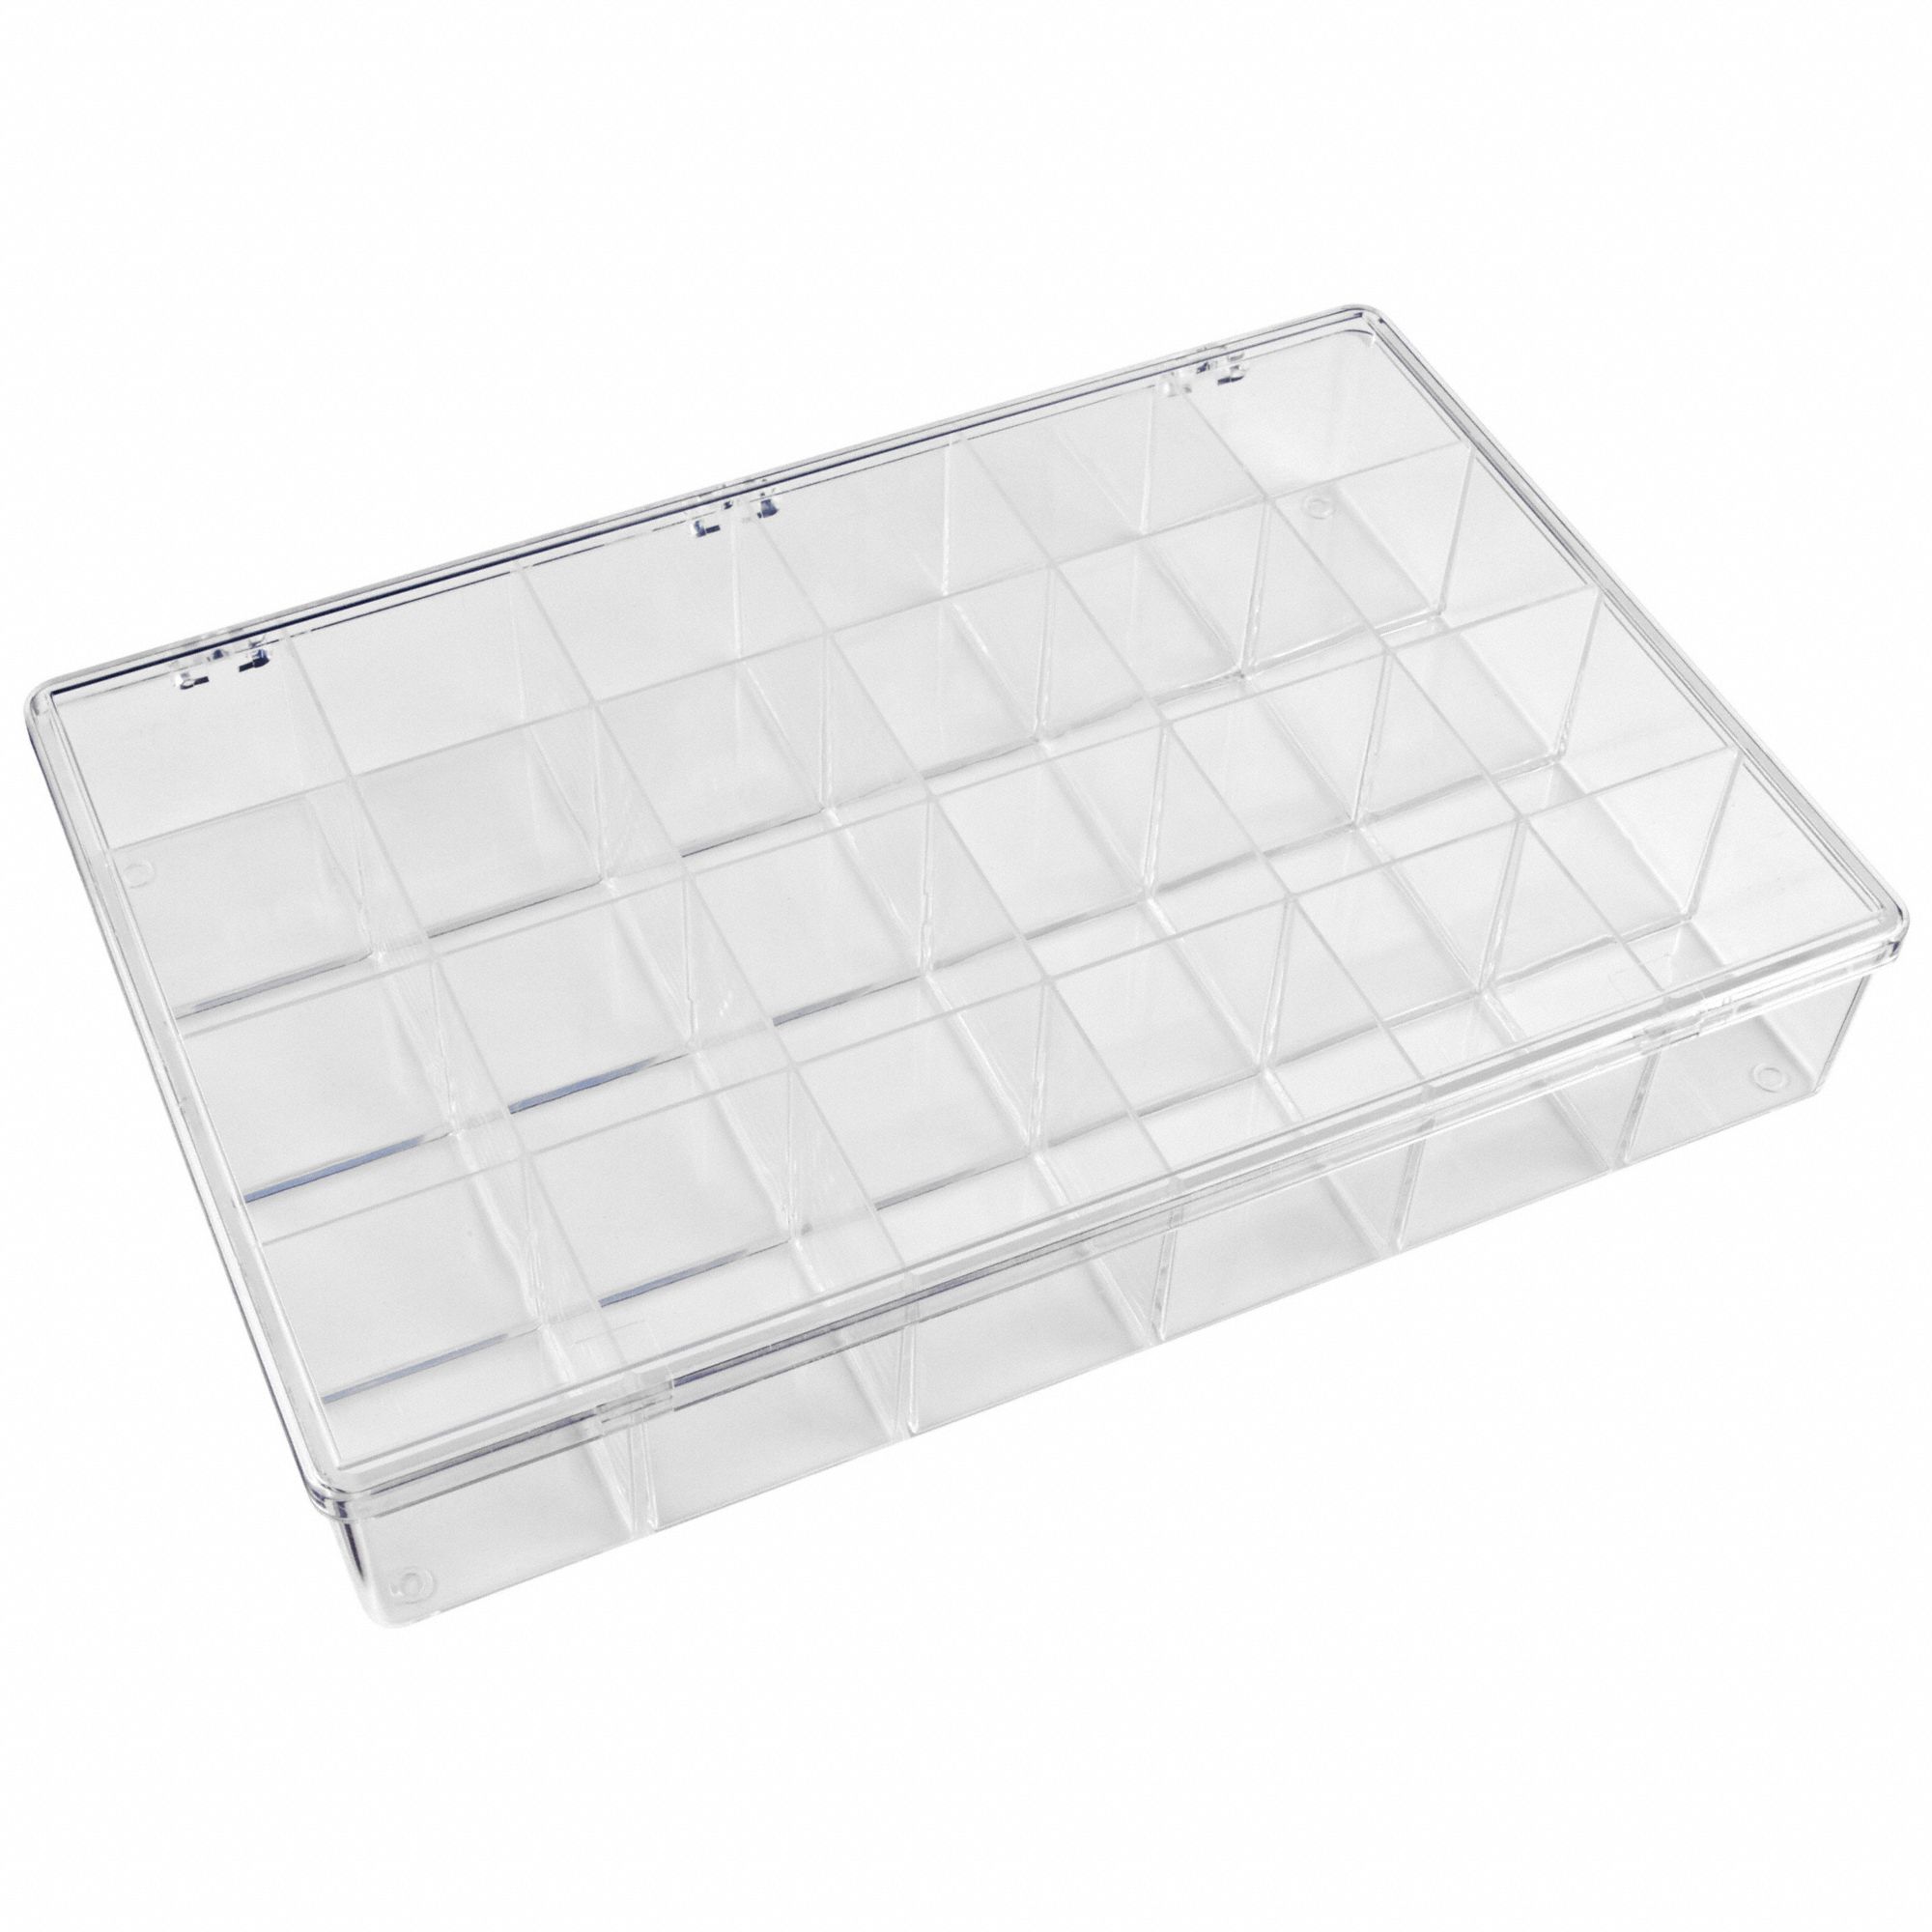 FLAMBEAU, 13 in x 2 7/8 in, Clear, Compartment Box - 2W467|6680KC ...